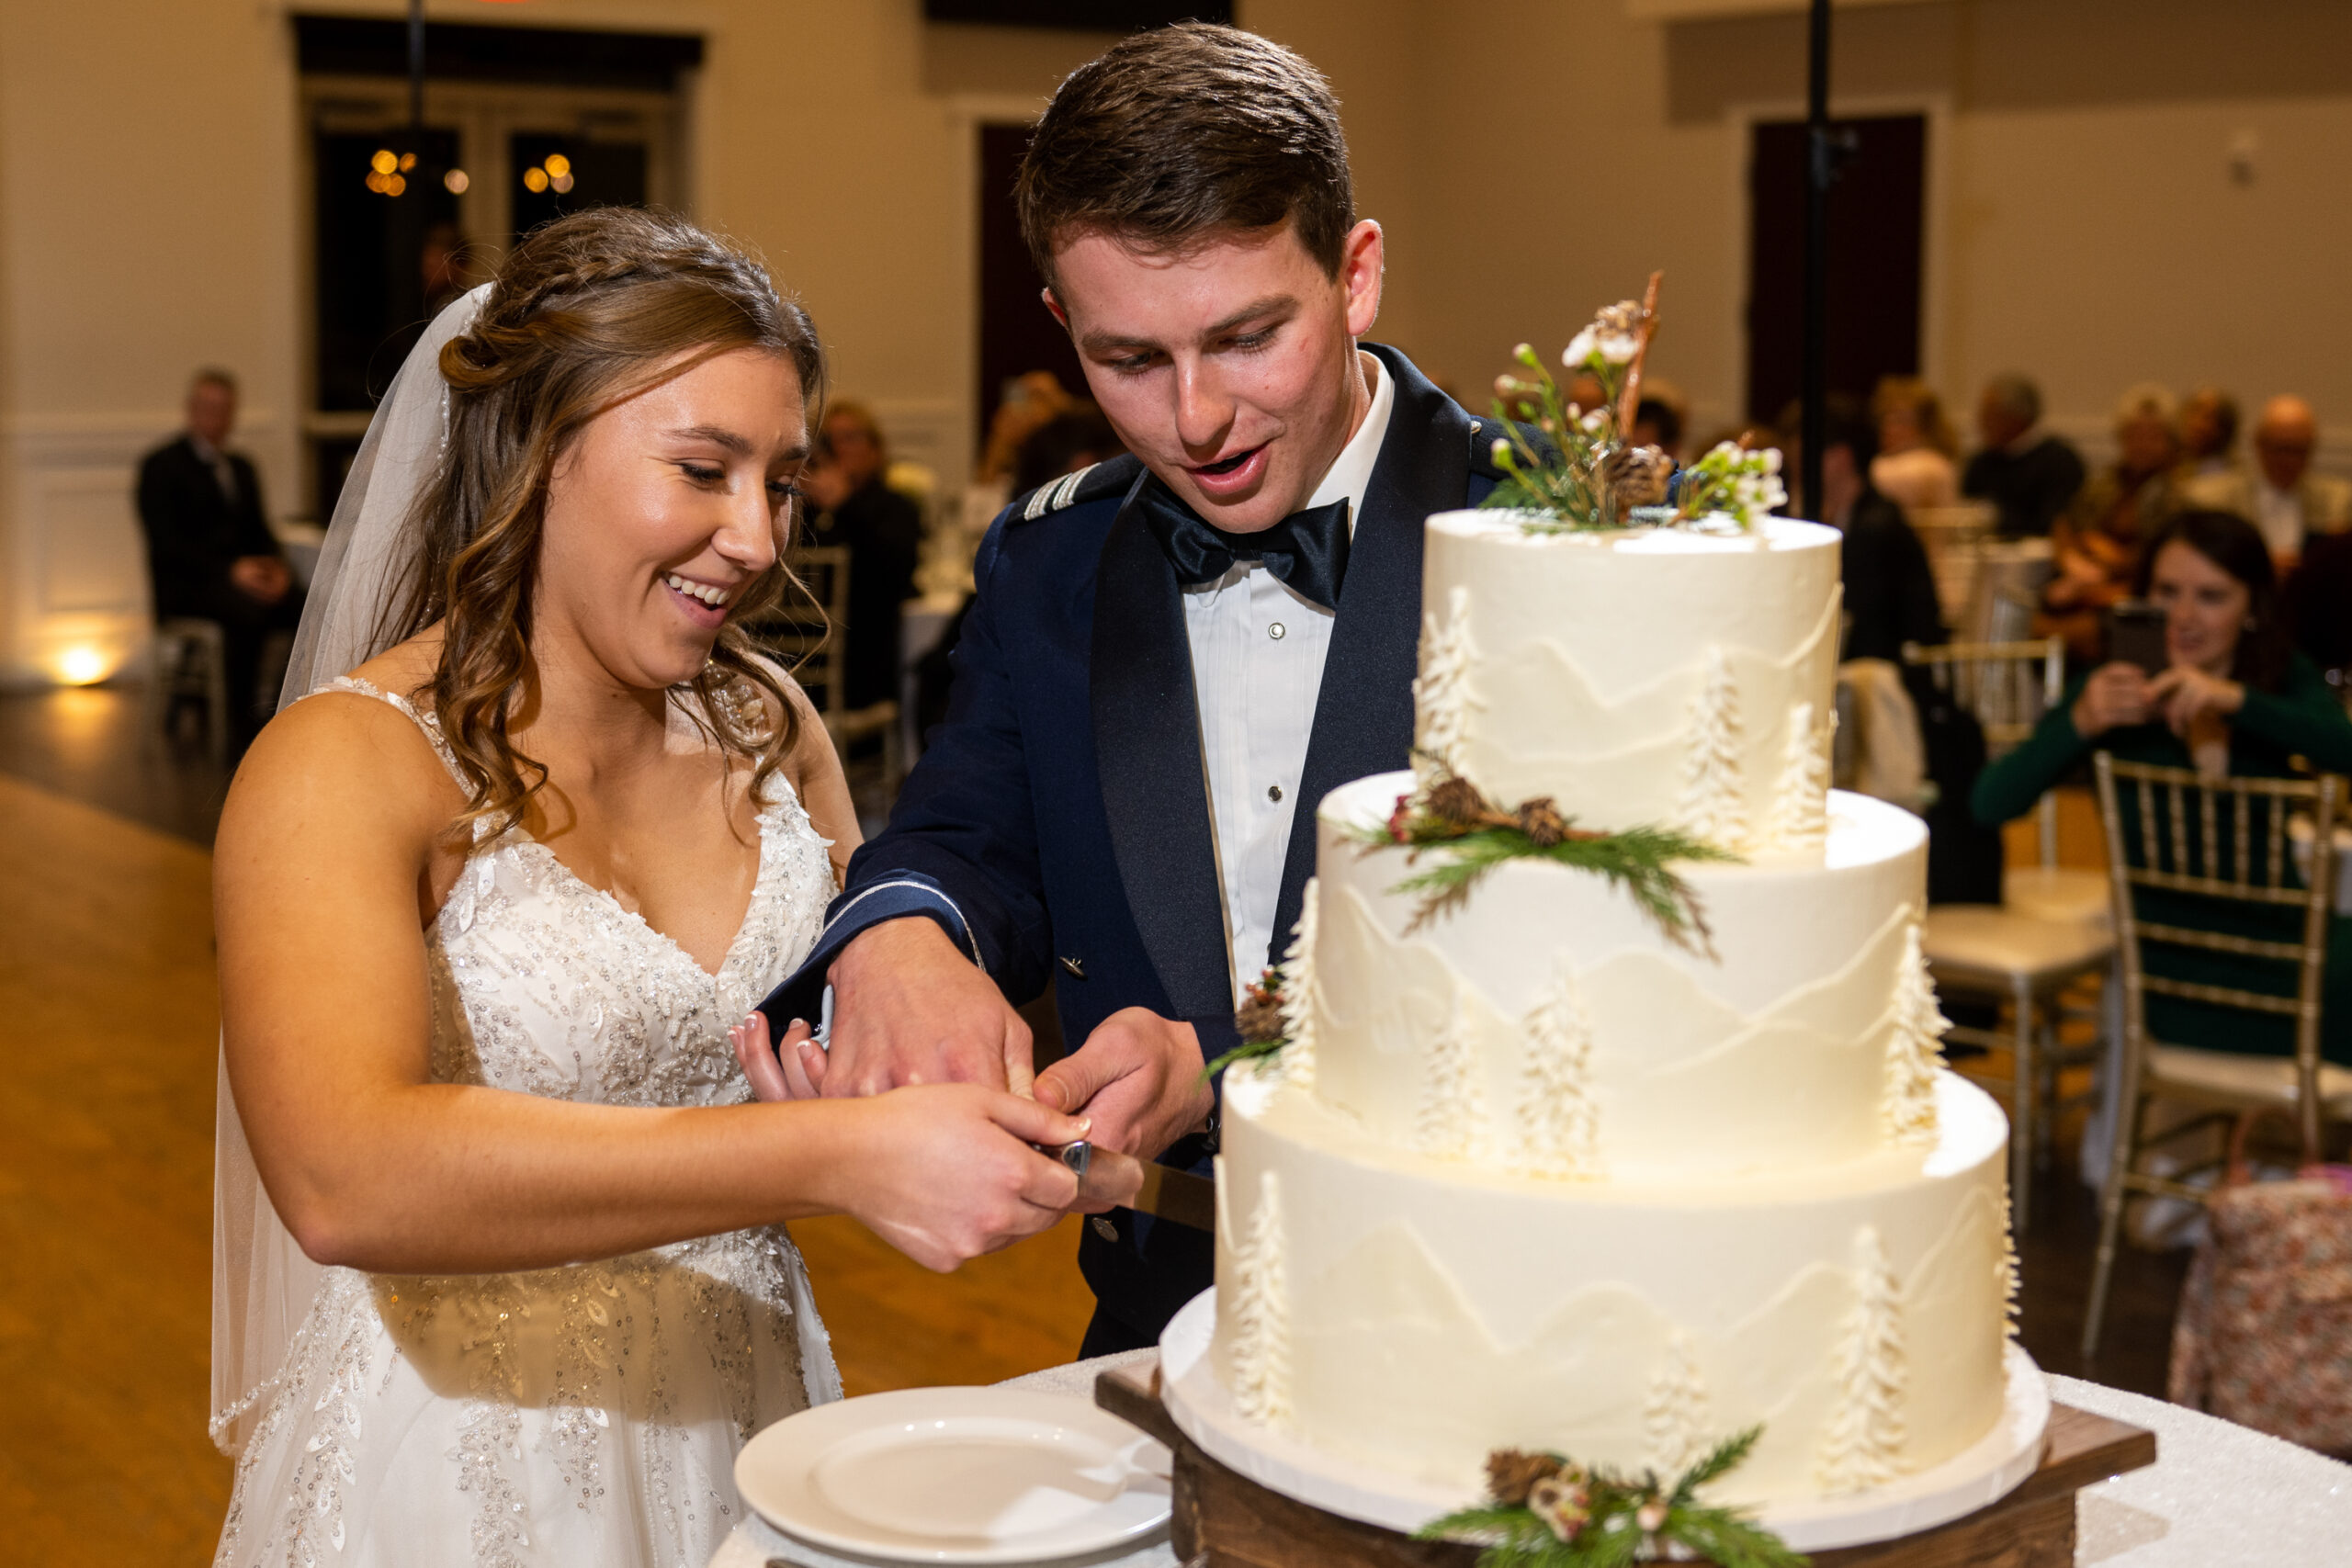 Jaime and Michael cut the cake during their Ashley Ridge by Wedgewood wedding in Littleton, Colorado.